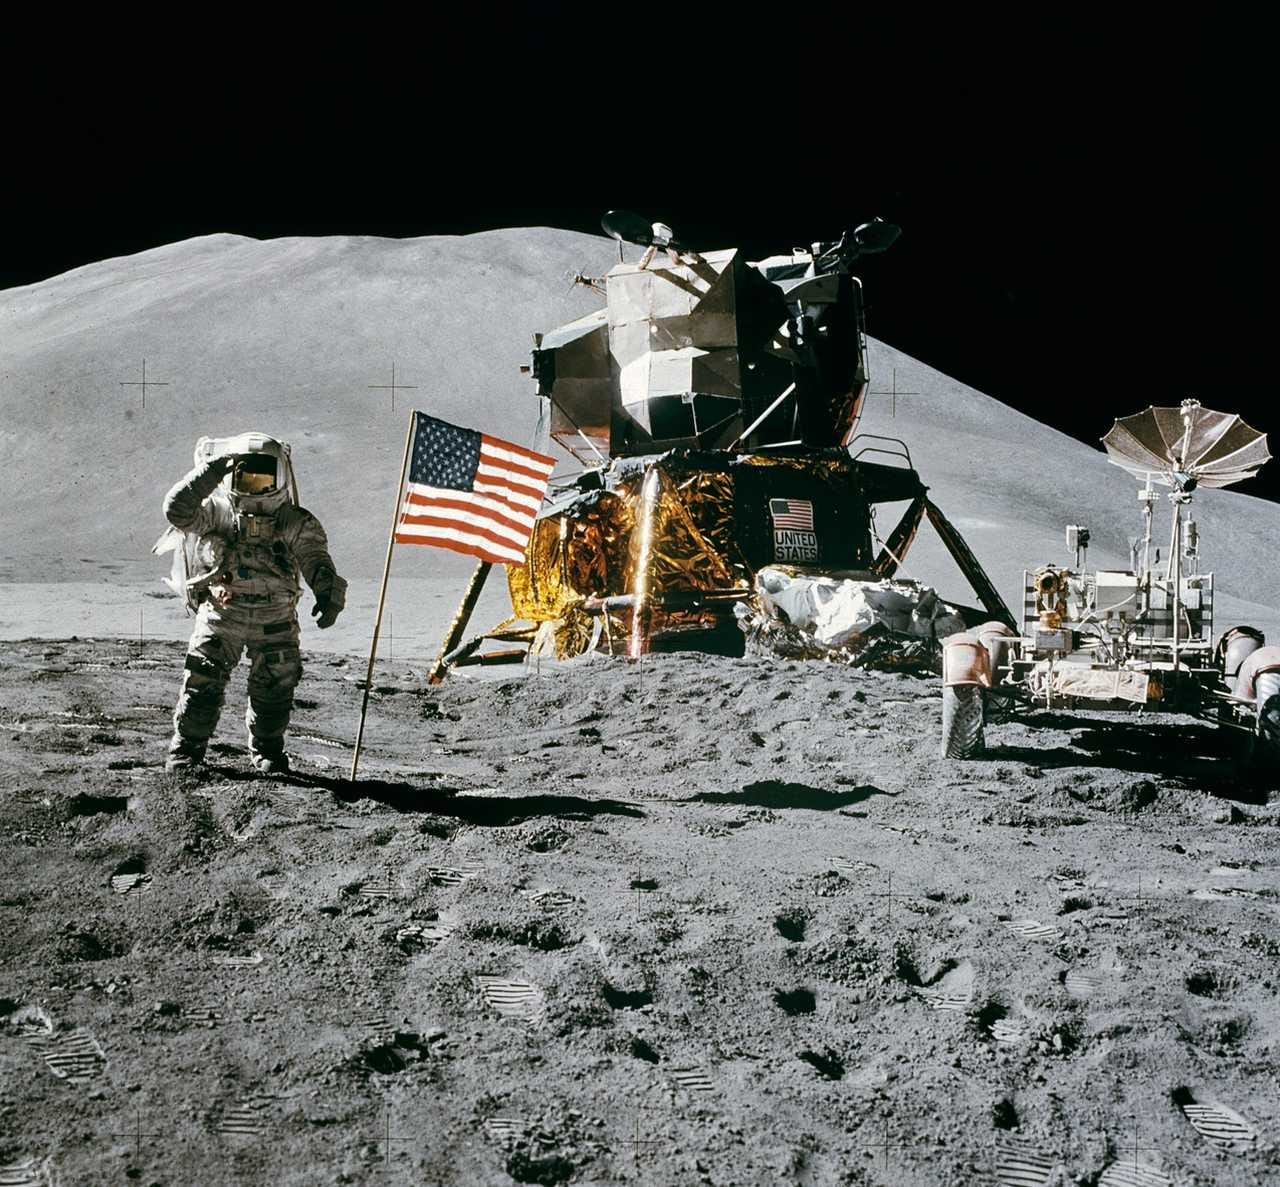 Image result from https://www.thetravelmagazine.net/us-space-tourism-where-to-celebrate-the-50th-anniversary-of-1969-moon-landing.html